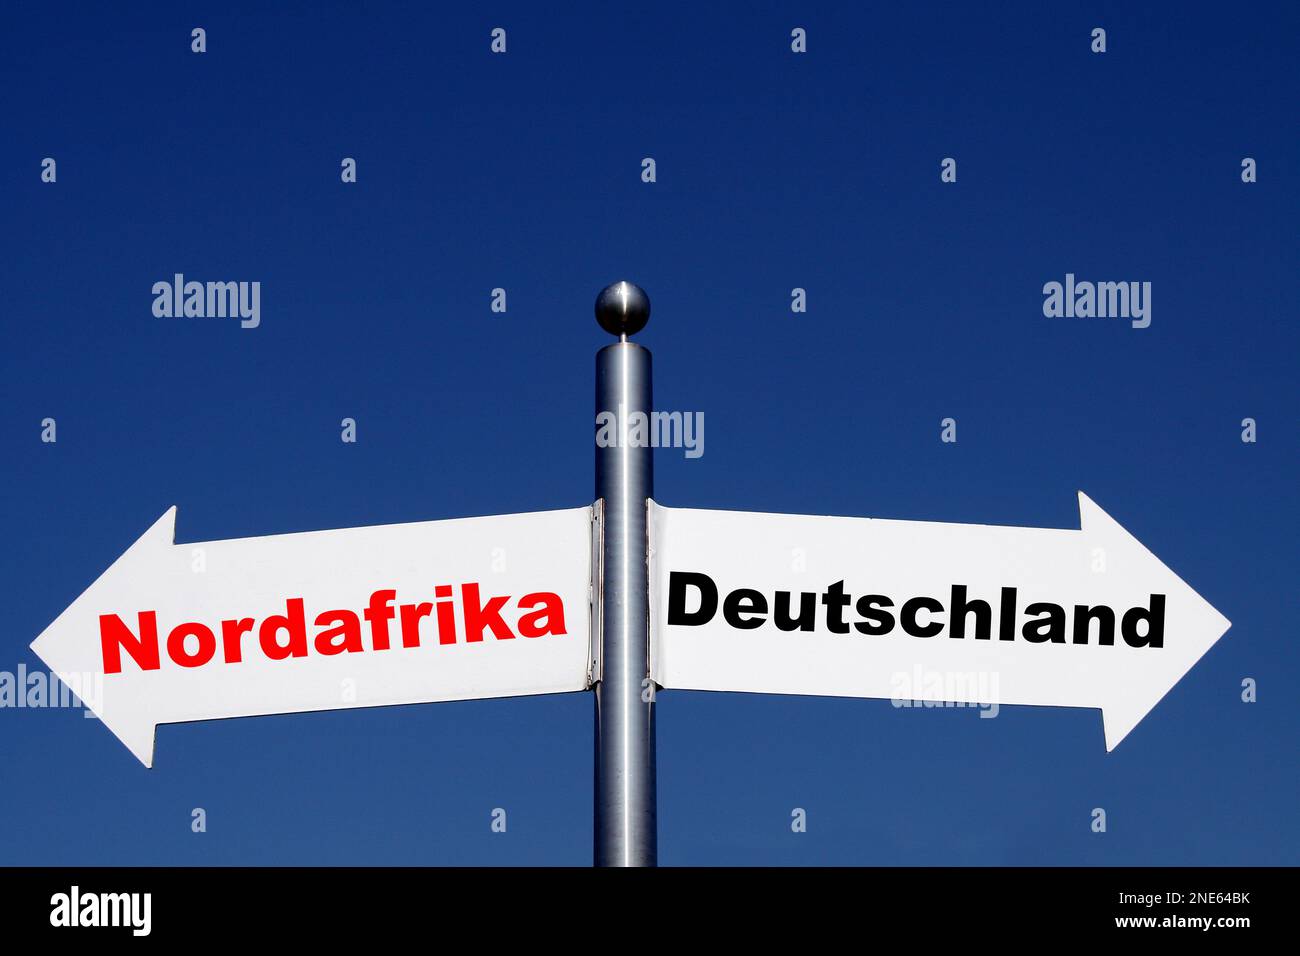 signposts pointing in different directions, options North Africa - Germany Stock Photo